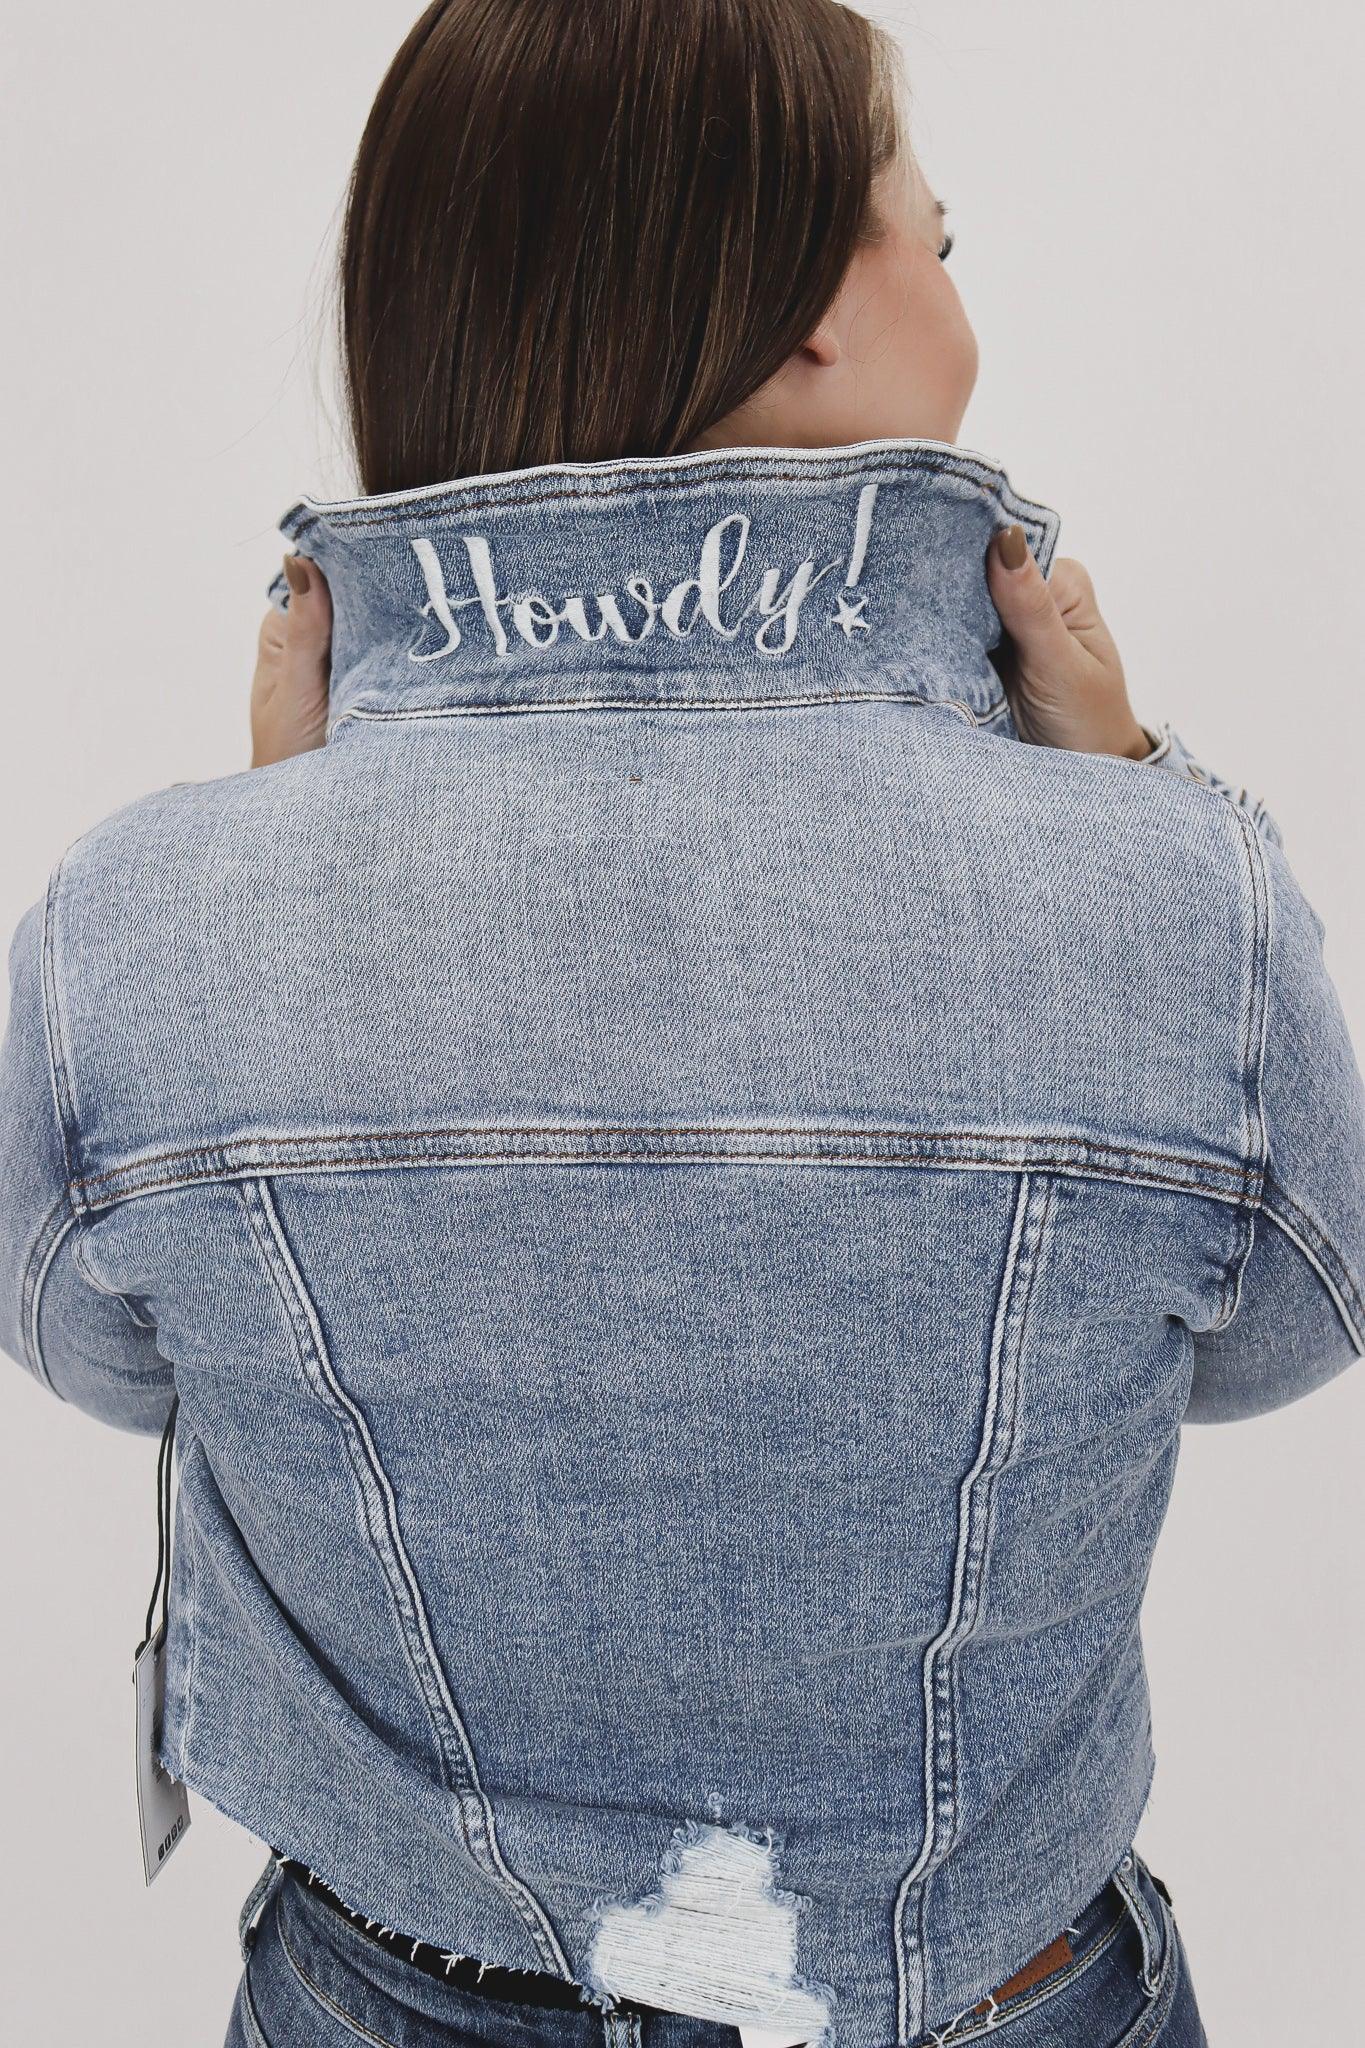 Classic Fit Jean Jacket with Howdy! Embroidery - Alexander Jane Boutique  